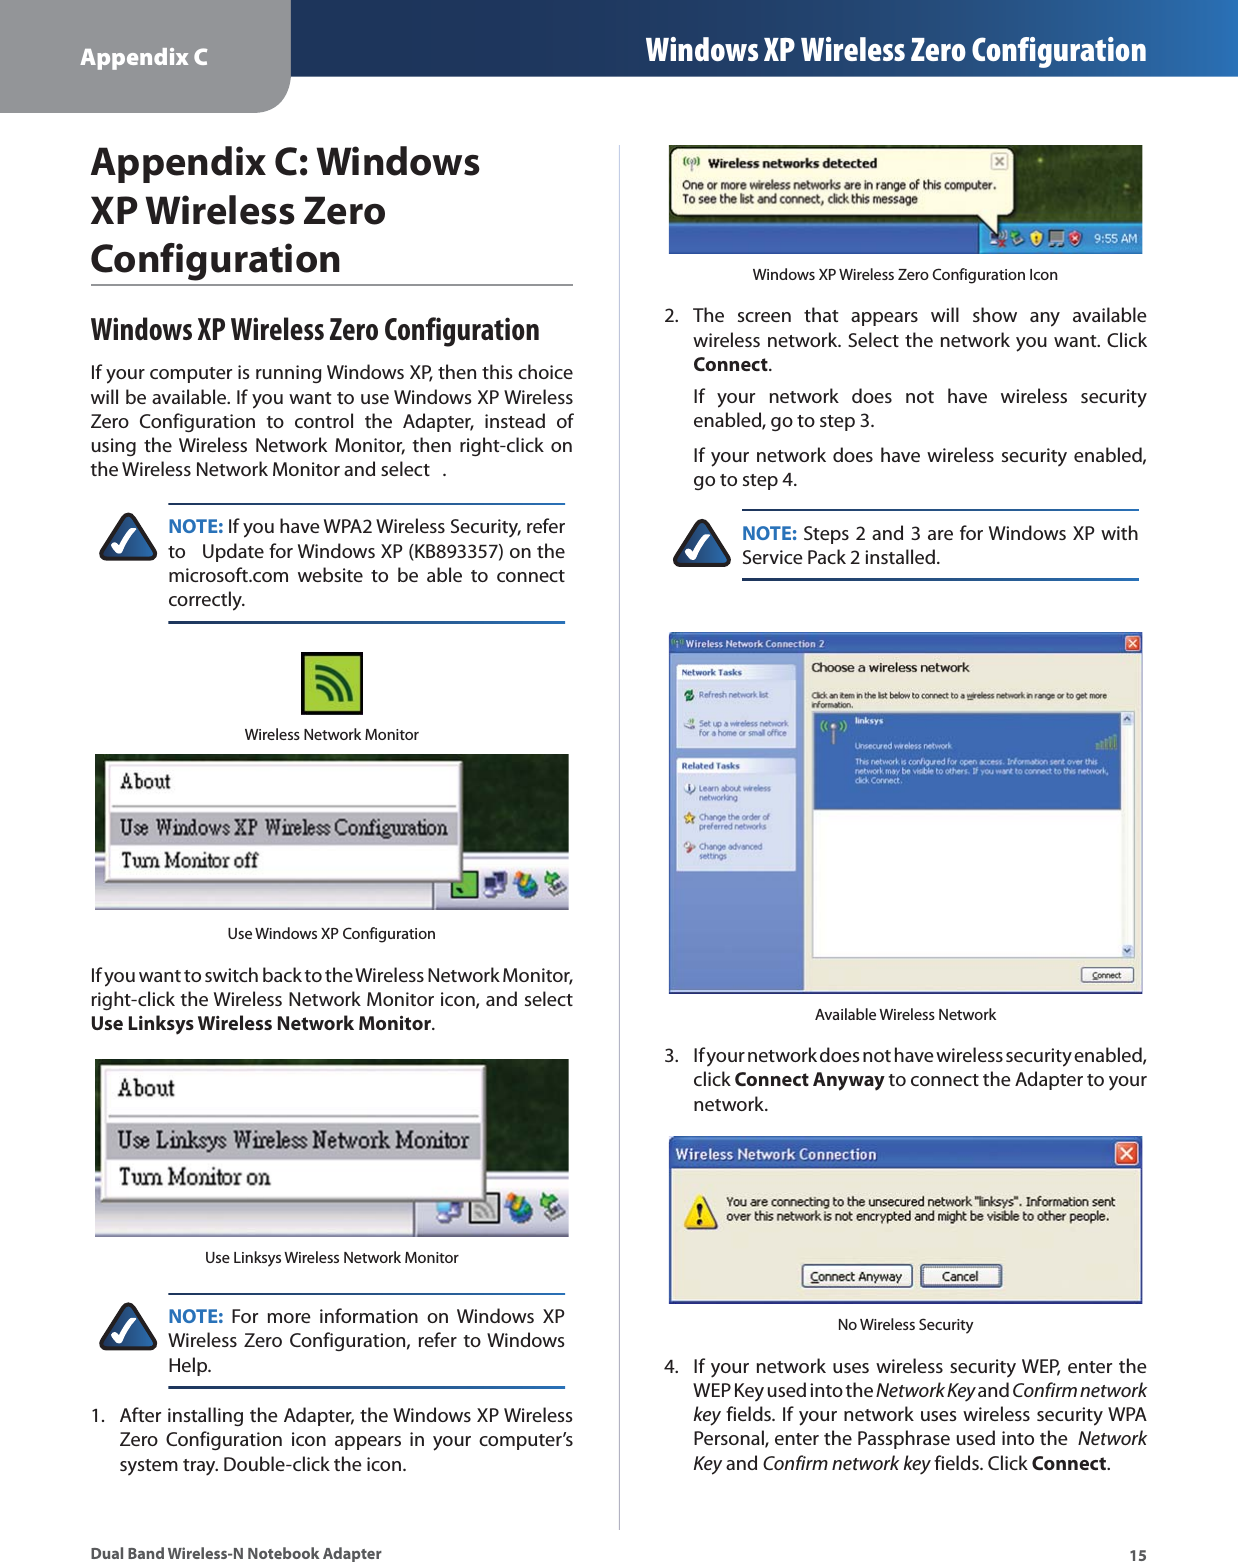 Appendix C Windows XP Wireless Zero Configuration15Dual Band Wireless-N Notebook AdapterAppendix C: Windows XP Wireless Zero ConfigurationWindows XP Wireless Zero ConfigurationIf your computer is running Windows XP, then this choice will be available. If you want to use Windows XP Wireless Zero Configuration to control the Adapter, instead of using the Wireless Network Monitor, then right-click on the Wireless Network Monitor and select  .NOTE: If you have WPA2 Wireless Security, refer to   Update for Windows XP (KB893357) on the microsoft.com website to be able to connect correctly.Wireless Network MonitorUse Windows XP ConfigurationIf you want to switch back to the Wireless Network Monitor, right-click the Wireless Network Monitor icon, and select Use Linksys Wireless Network Monitor.Use Linksys Wireless Network MonitorNOTE: For more information on Windows XP Wireless Zero Configuration, refer to Windows Help.After installing the Adapter, the Windows XP Wireless Zero Configuration icon appears in your computer’s system tray. Double-click the icon. 1.Windows XP Wireless Zero Configuration IconThe screen that appears will show any available wireless network. Select the network you want. Click Connect.If your network does not have wireless security enabled, go to step 3.If your network does have wireless security enabled, go to step 4.NOTE: Steps 2 and 3 are for Windows XP with Service Pack 2 installed.Available Wireless NetworkIf your network does not have wireless security enabled, click Connect Anyway to connect the Adapter to your network.No Wireless SecurityIf your network uses wireless security WEP, enter the WEP Key used into the Network Key and Confirm networkkey fields. If your network uses wireless security WPA Personal, enter the Passphrase used into the  Network Key and Confirm network key fields. Click Connect.2.3.4.